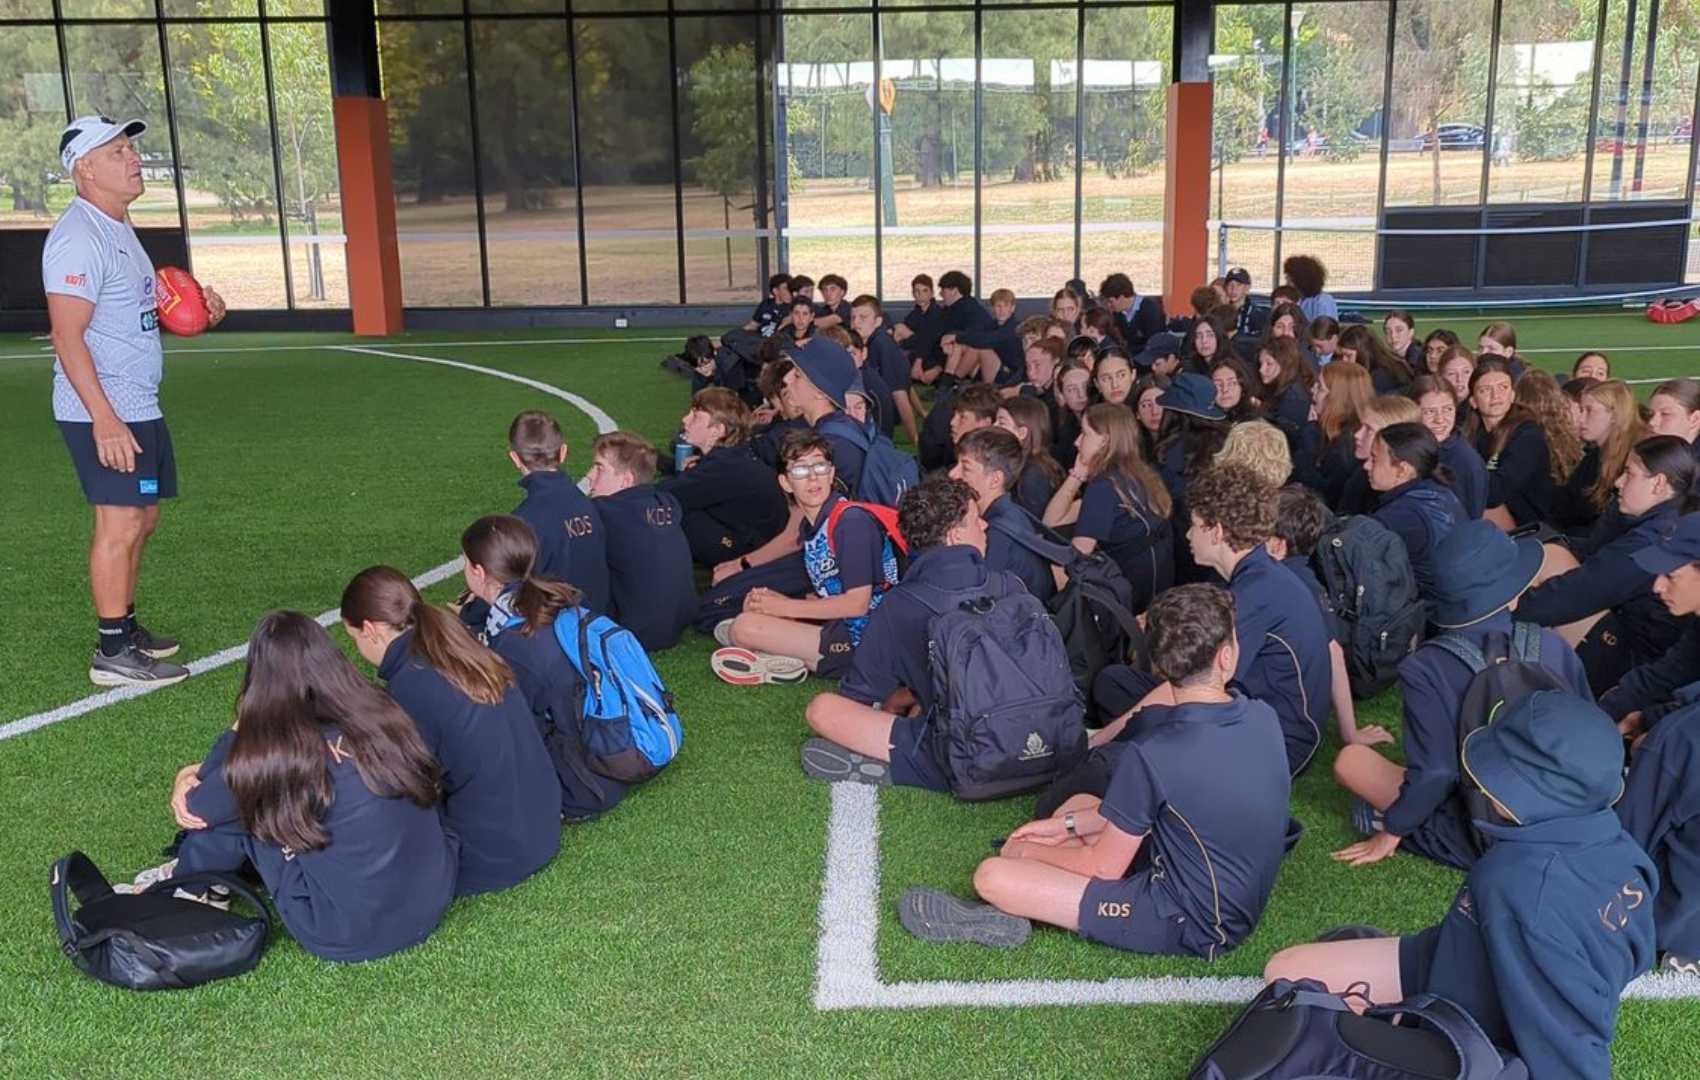 Greg Diesel Williams of Carlton Football Club addresses Year 8 and Year 9 King David students on a oval. He is holding a red ball.